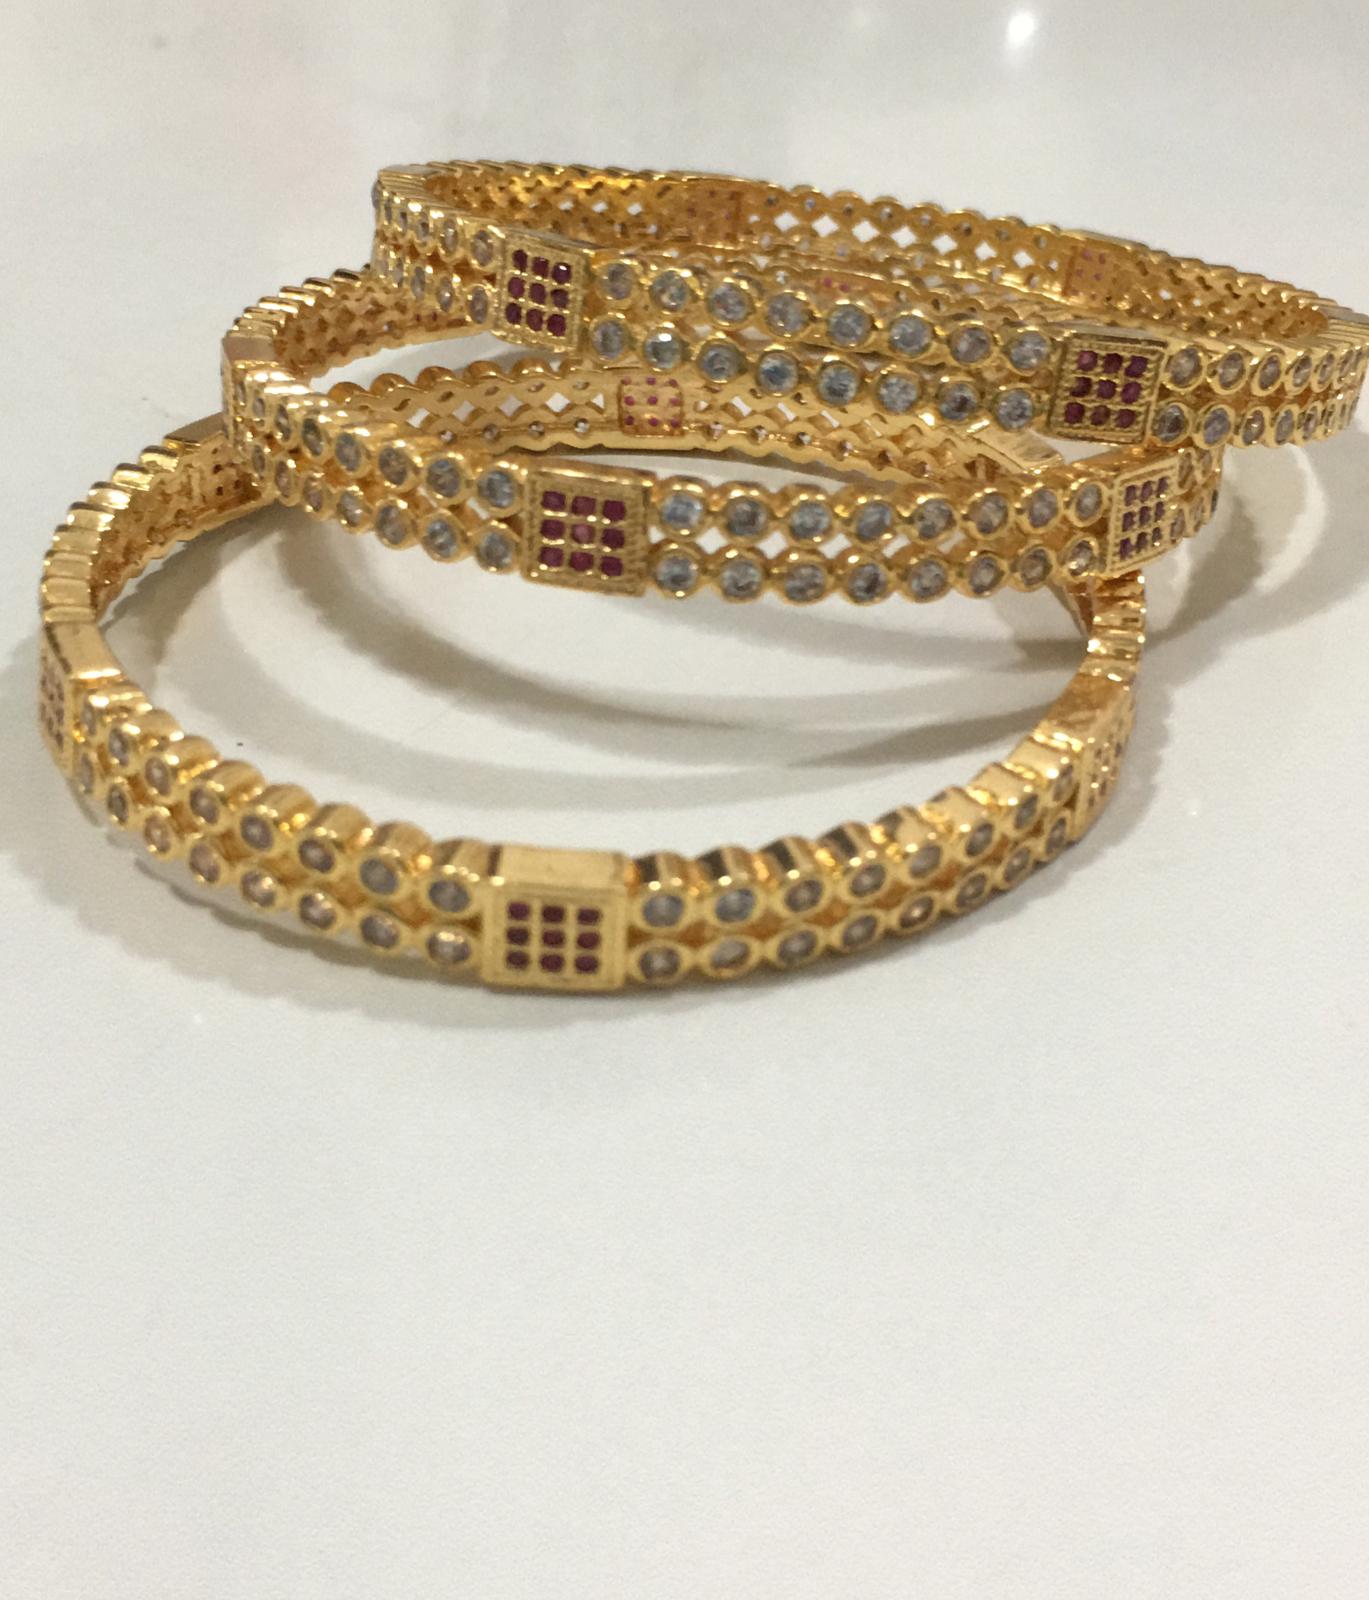 157660A $20.00 1PC BANGLE (GOLD PLATED)